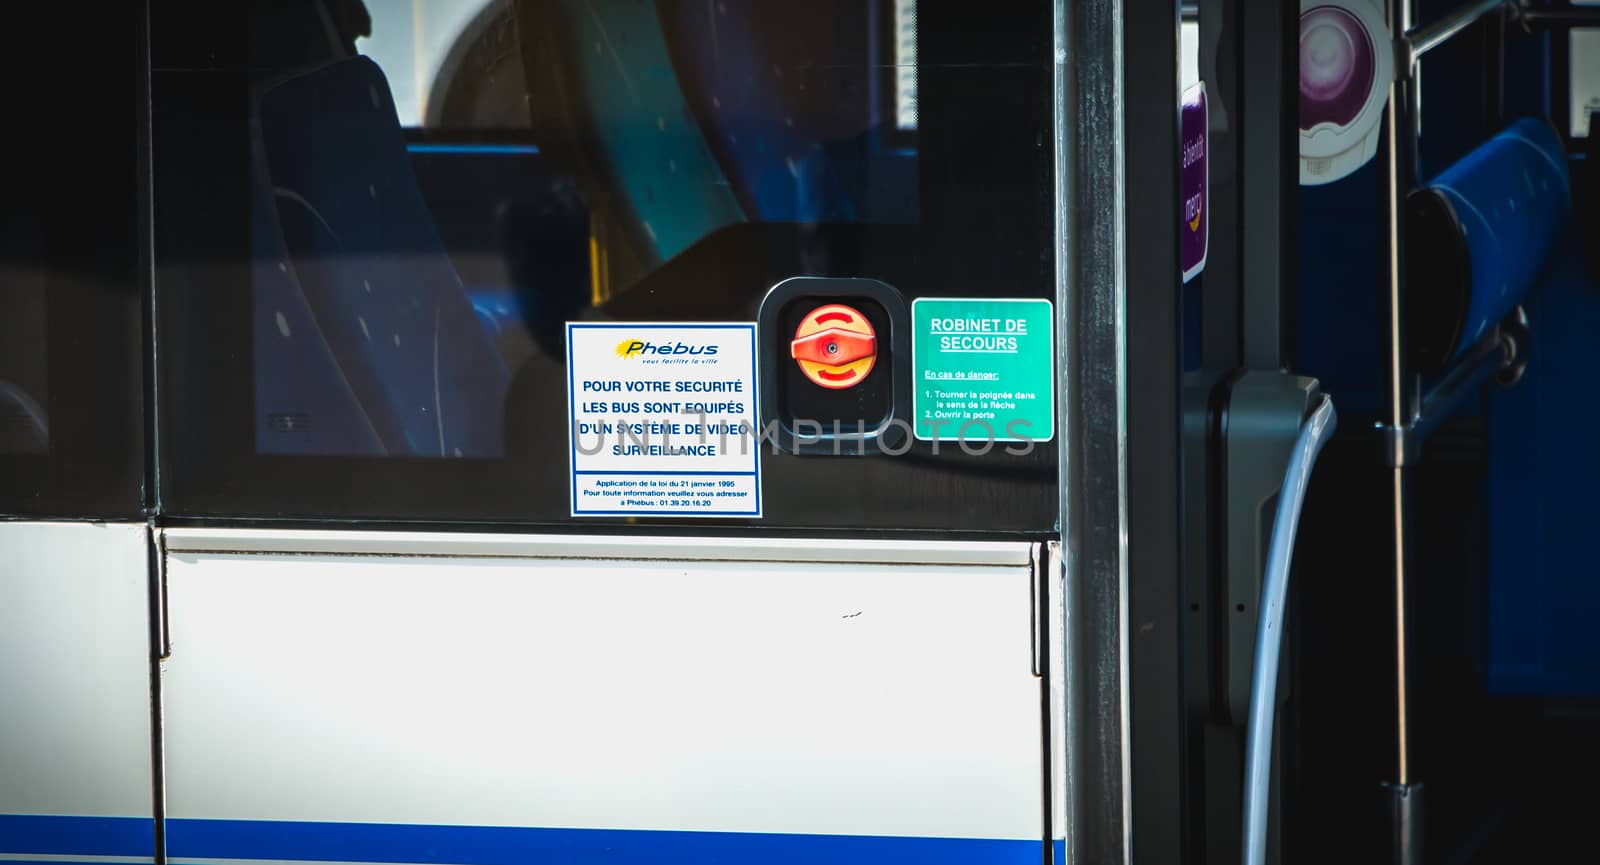 Sign in French For your safety the buses are equipped with a vid by AtlanticEUROSTOXX